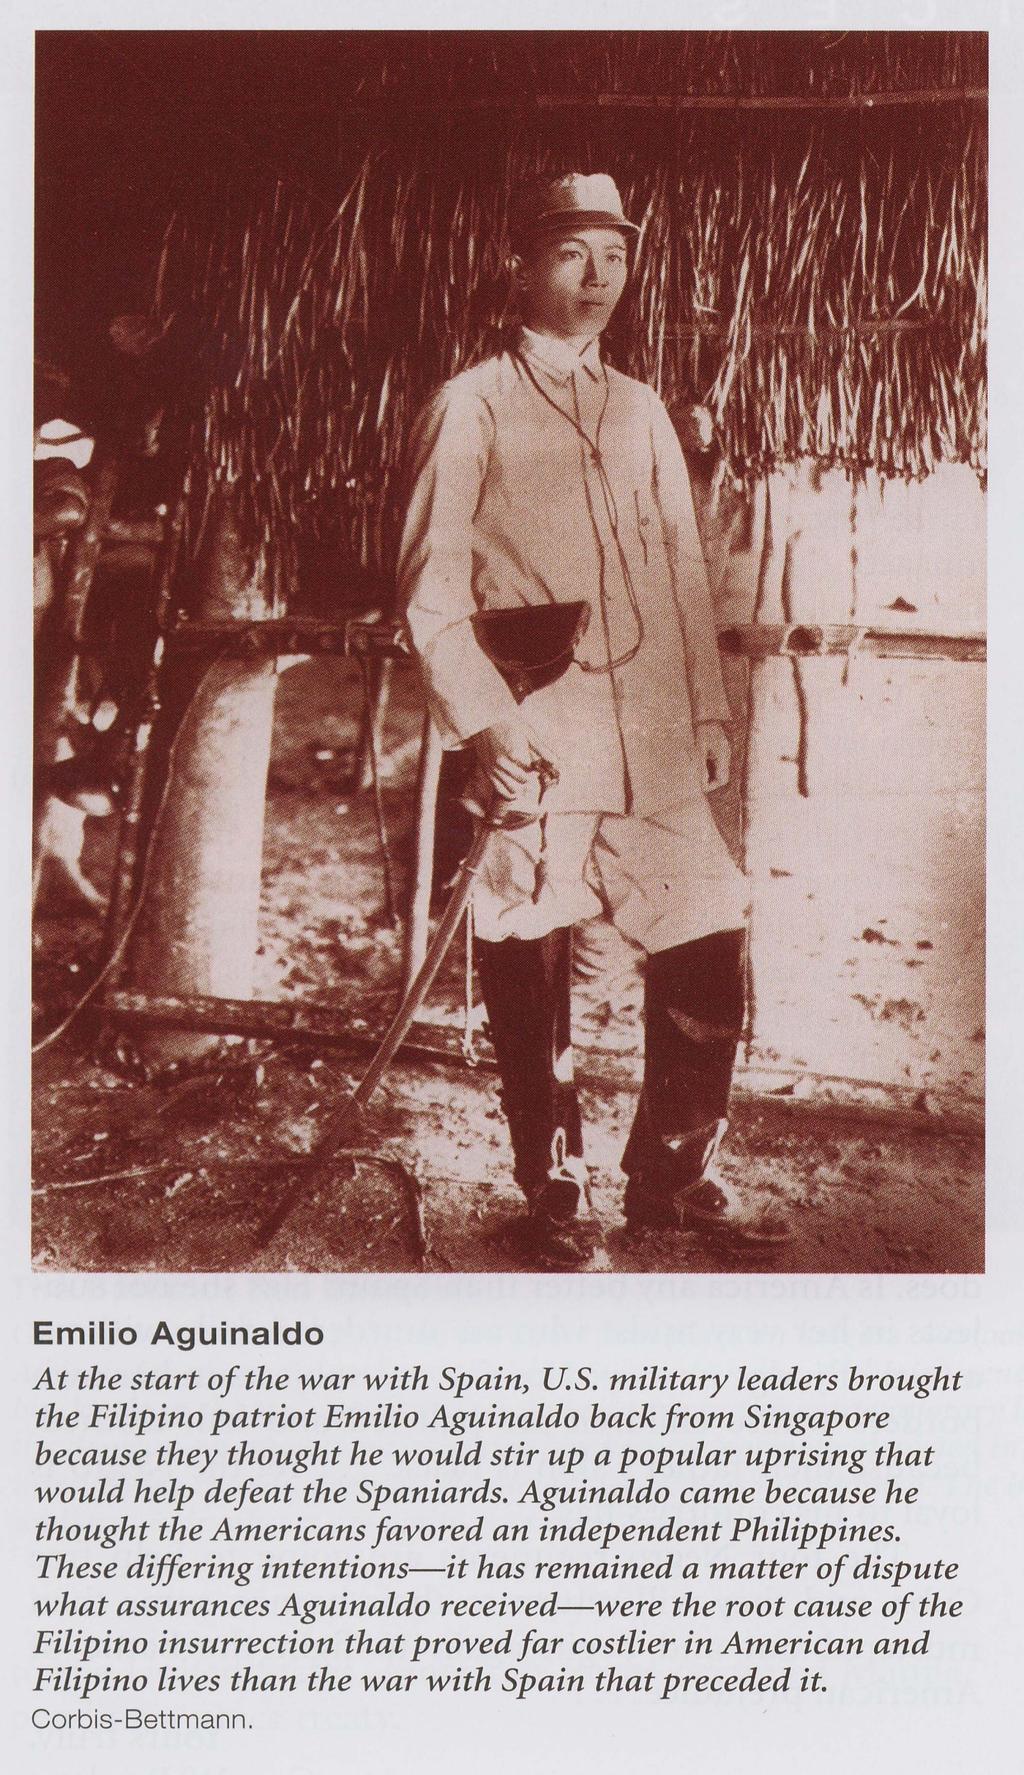 The Philippines Emilio Aguinaldo was the leader of the Filipino independence